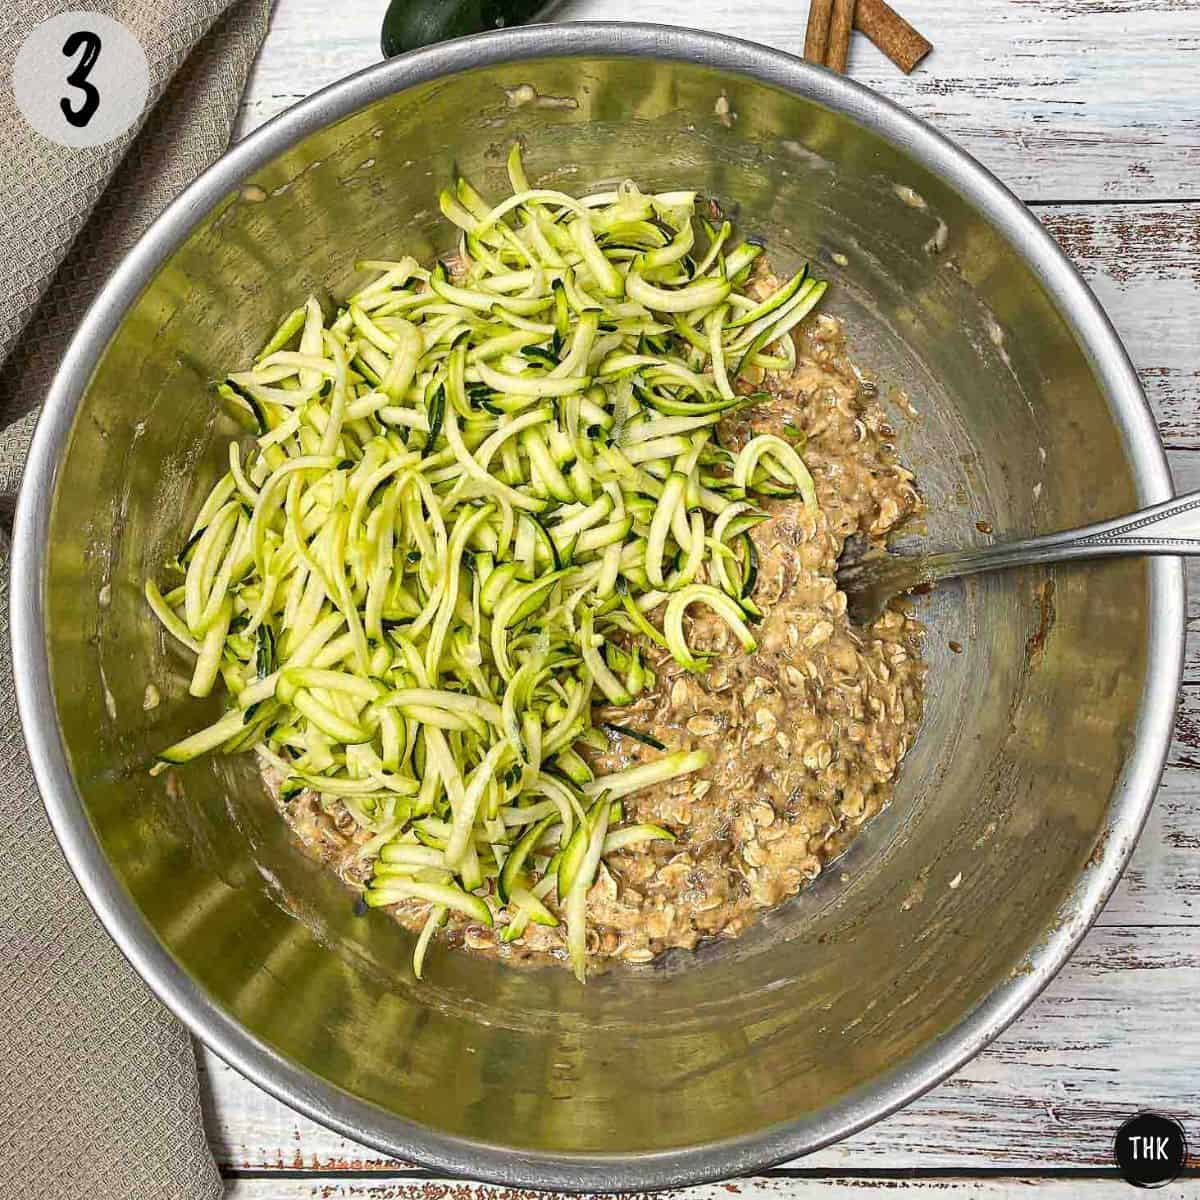 Batter inside large bowl with shredded zucchini on top.